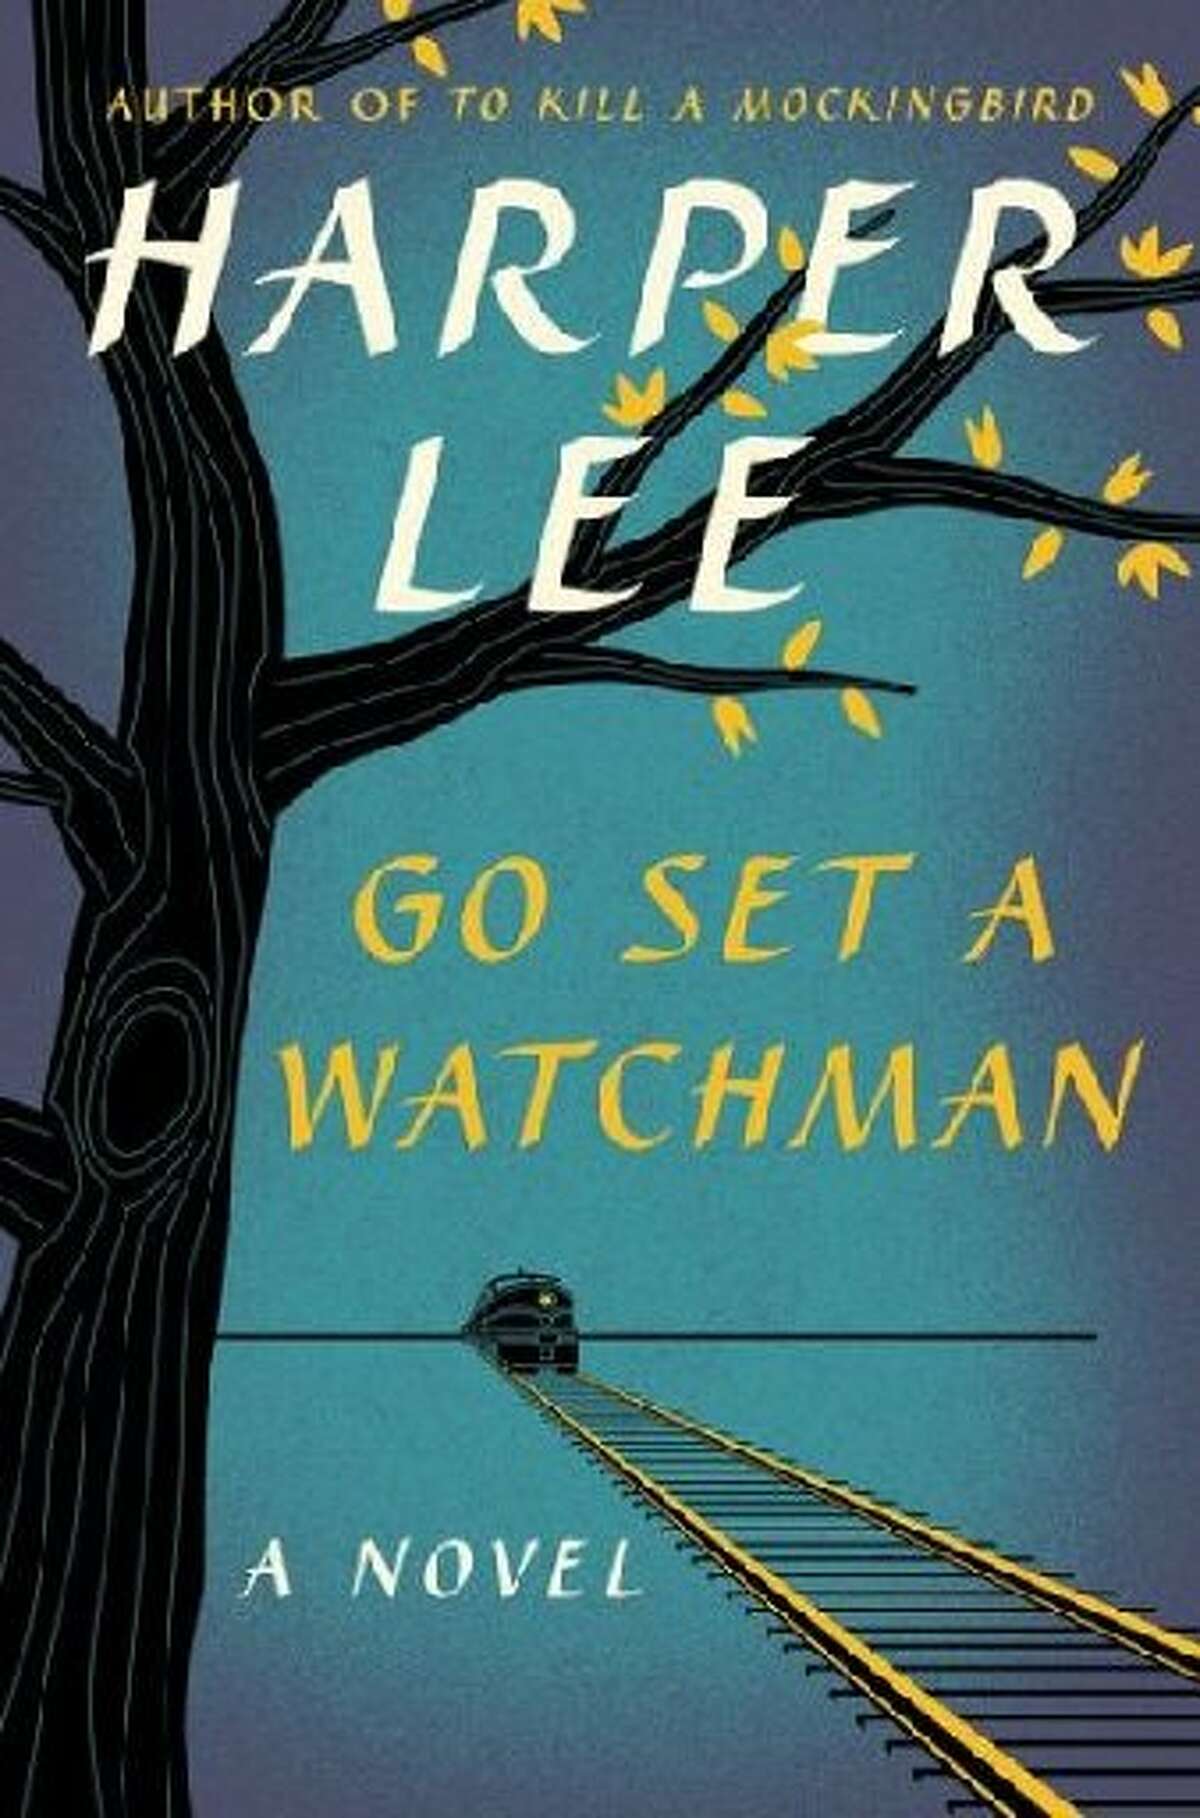 Go Set a Watchman "Go Set a Watchman," by Harper Lee (HarperCollins), is an early draft of the Pulitzer-winning “To Kill a Mockingbird,” Neither prequel nor sequel, "Go Set a Watchman" suffers from afflictions common to early drafts: saggy plotting, intellectual woolgathering and the absence of an ending. But read as a draft, “Watchman” is a fascinating artifact, exposing the seeds of a story that bloomed into an American classic.